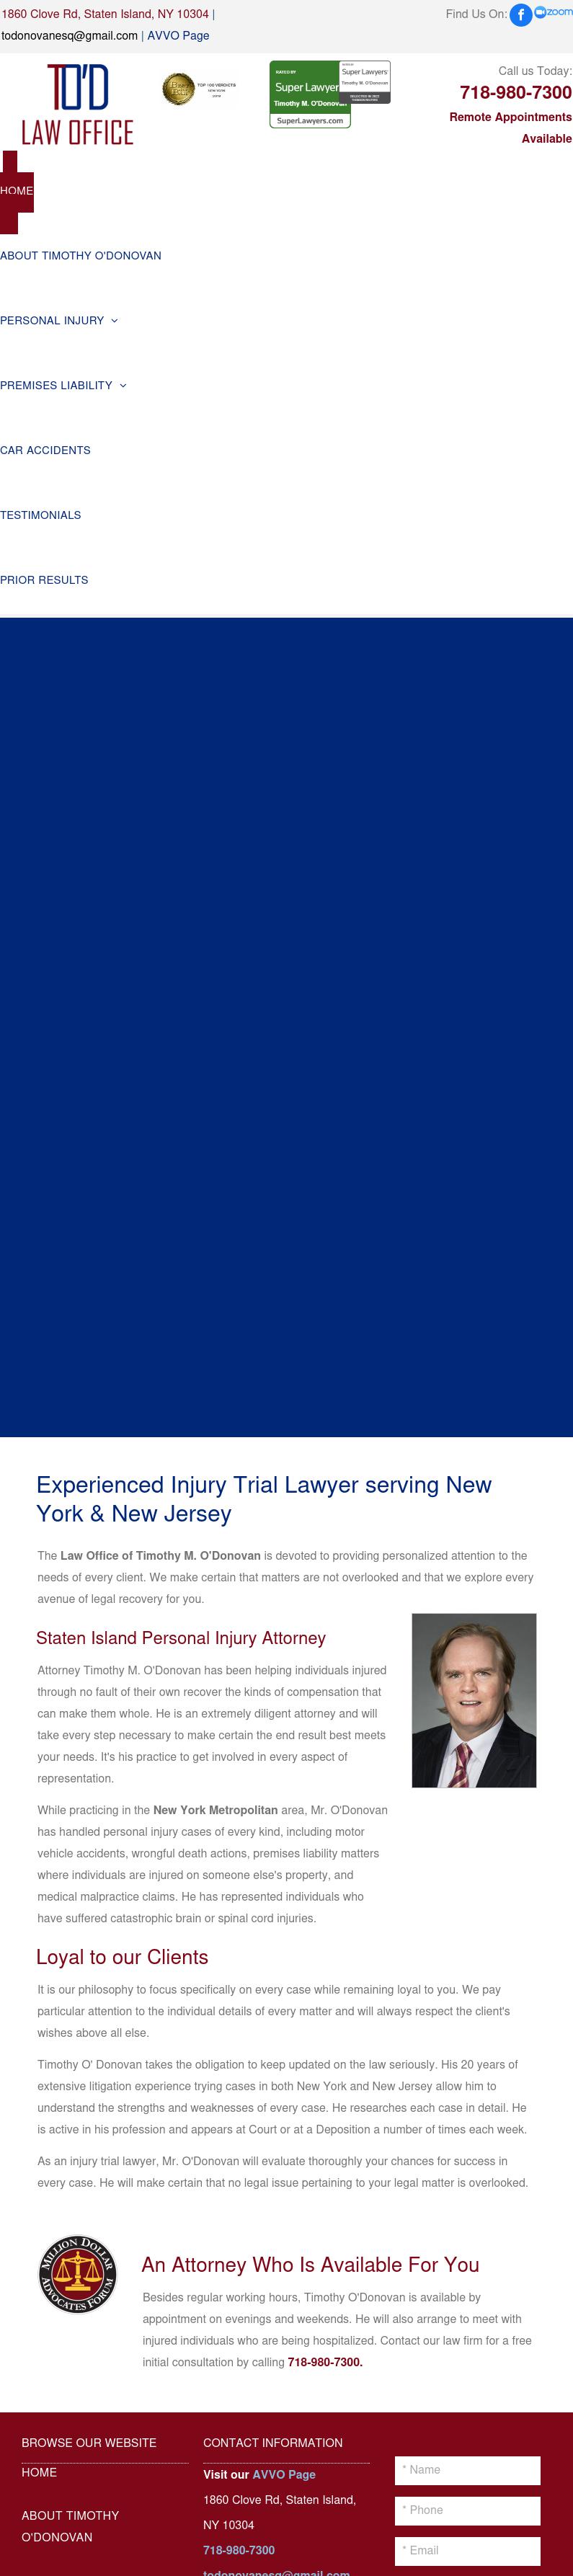 Law Office of Timothy M. O'Donovan - Staten Island NY Lawyers